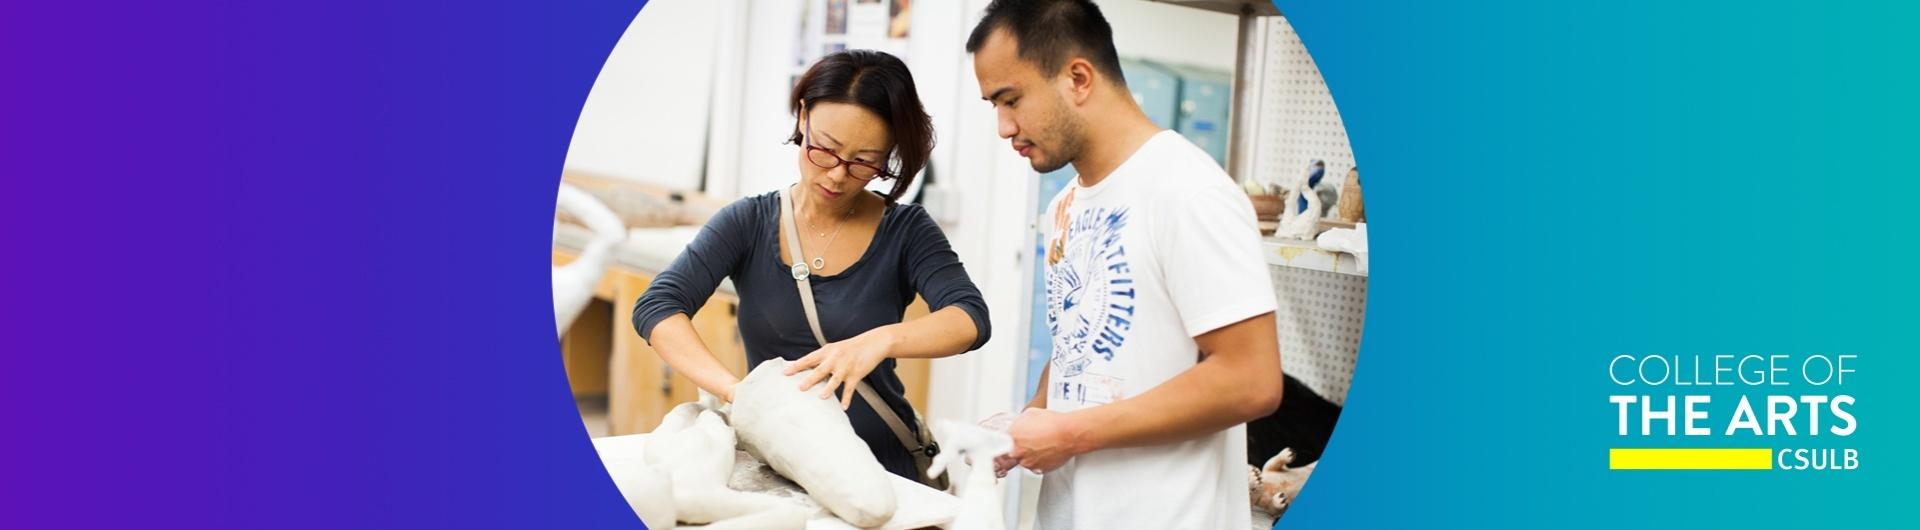 CSULB Ceramics instructor gives feedback to student.